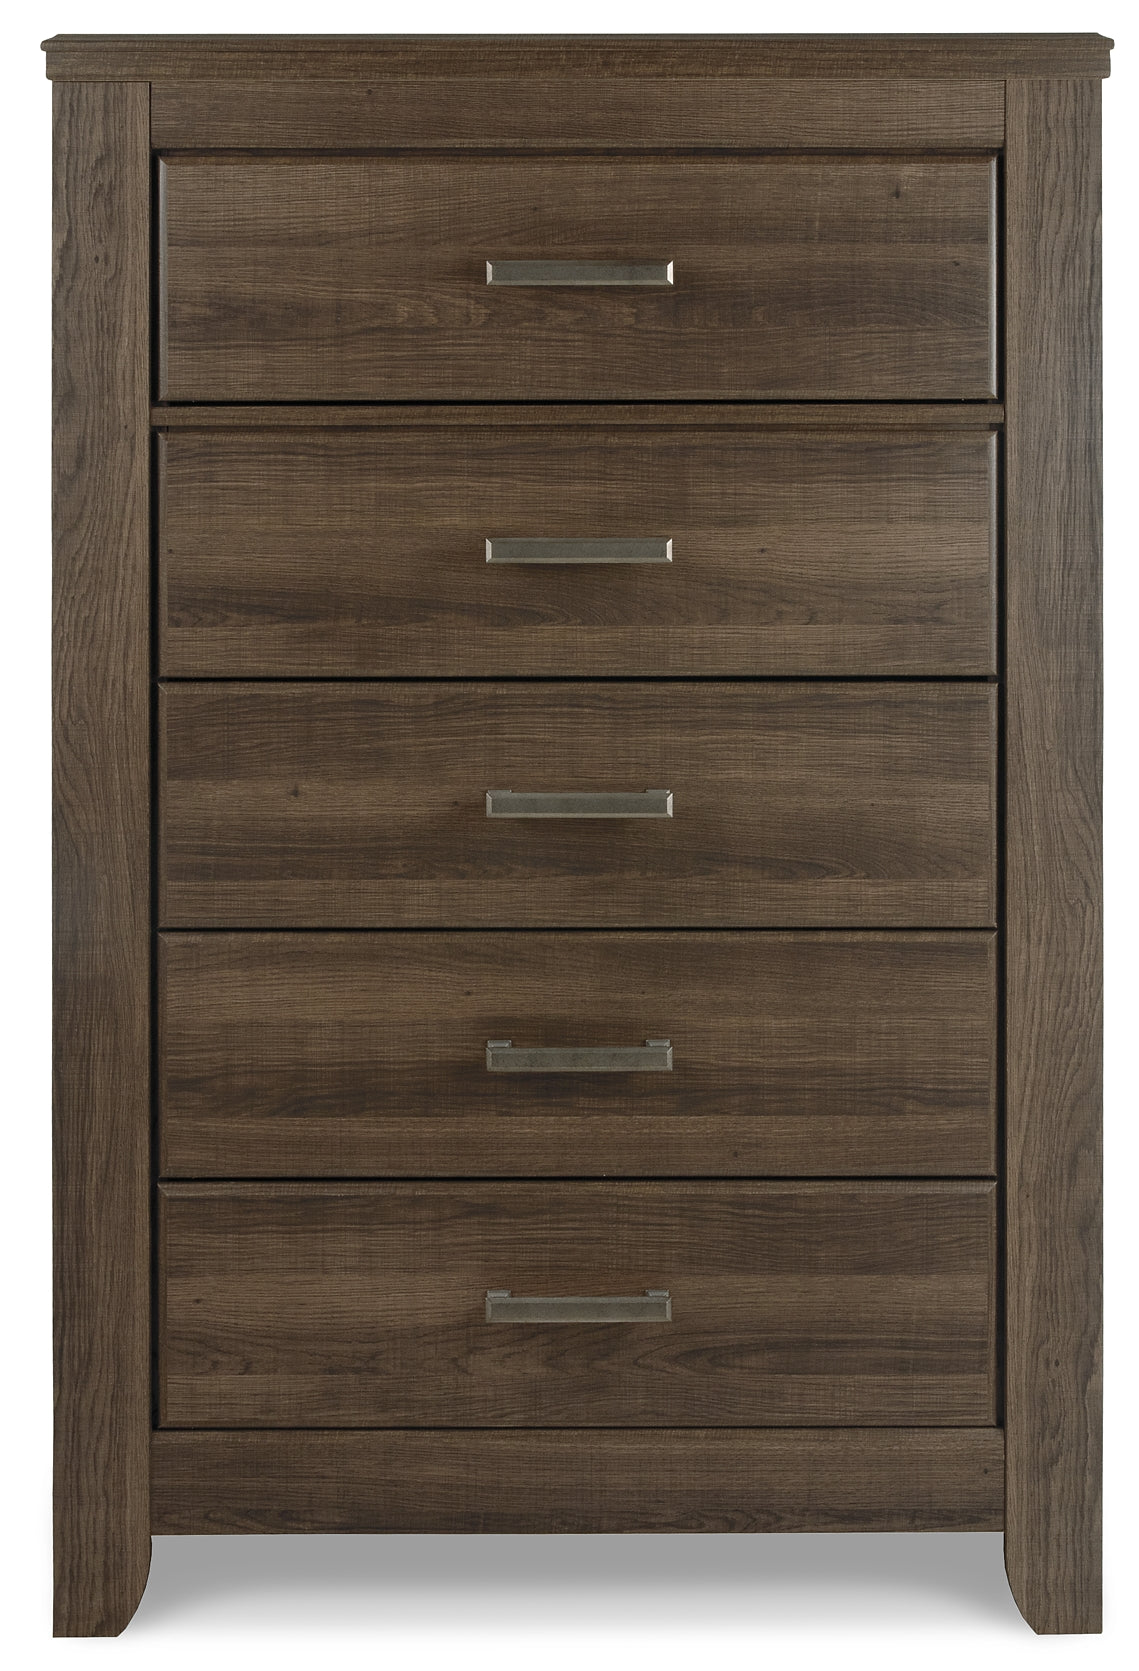 Juararo California King Panel Bed with Mirrored Dresser, Chest and Nightstand Milwaukee Furniture of Chicago - Furniture Store in Chicago Serving Humbolt Park, Roscoe Village, Avondale, & Homan Square